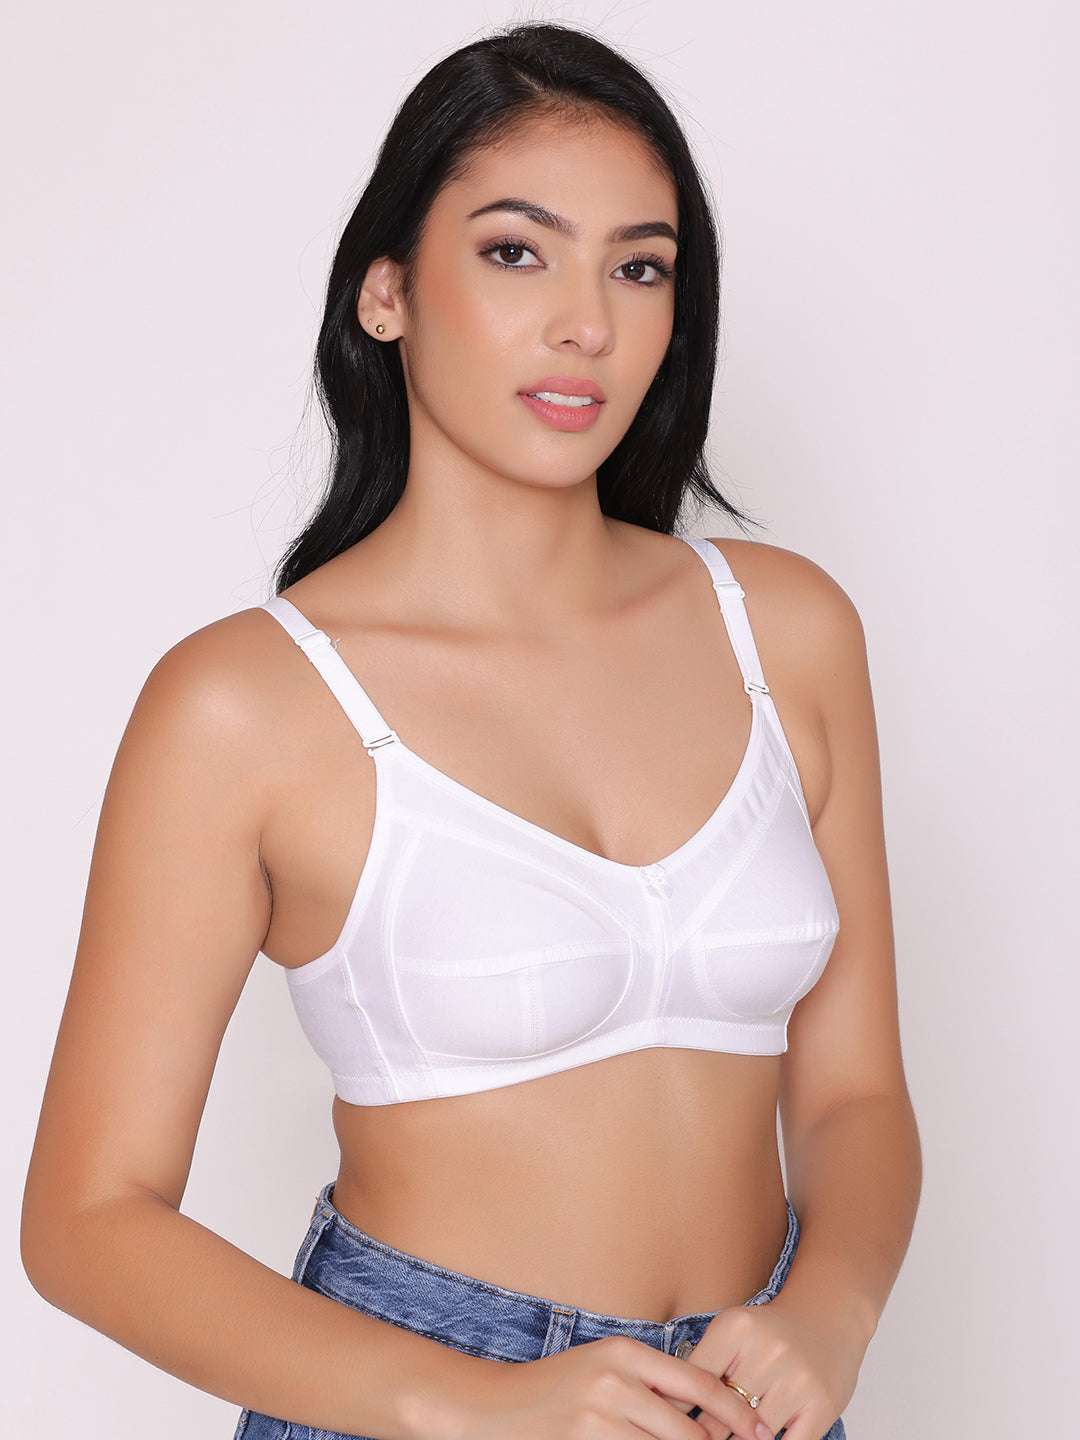 Soft Natural 100% Cotton Bra Liners - Moisture Absorbing, Seamless, Tagless  - Medium: 18 End-to-End